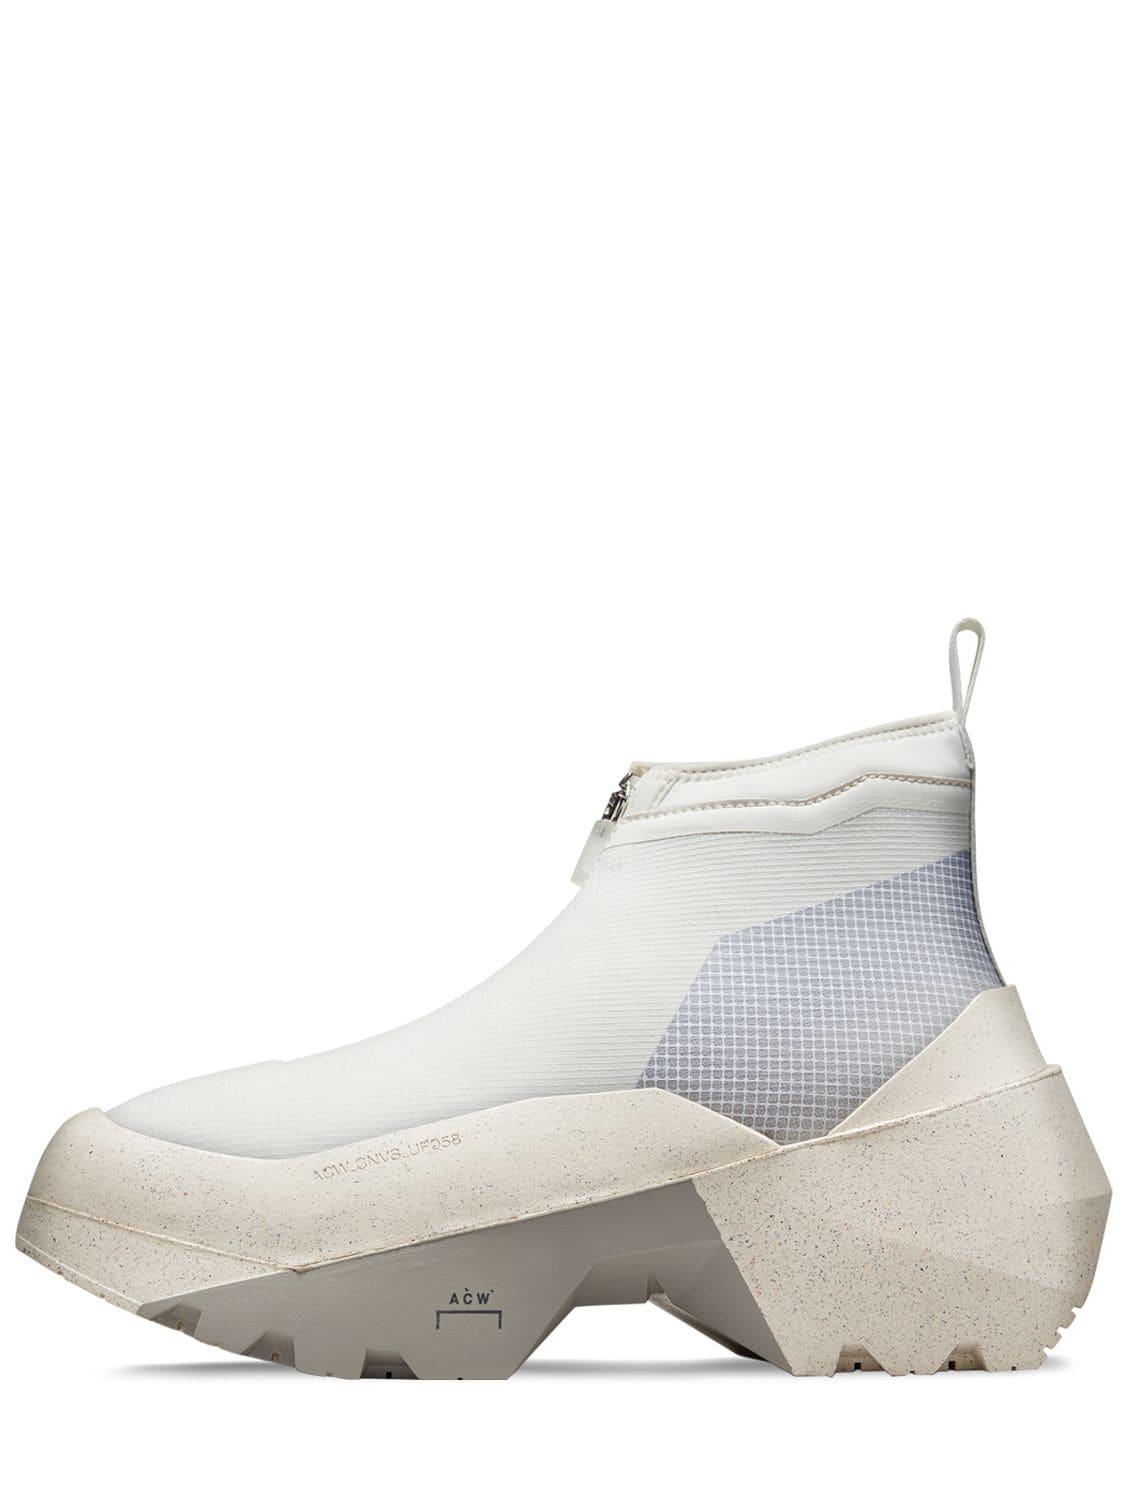 Converse A Cold Wall Geo Forma Boot in White | Lyst Canada